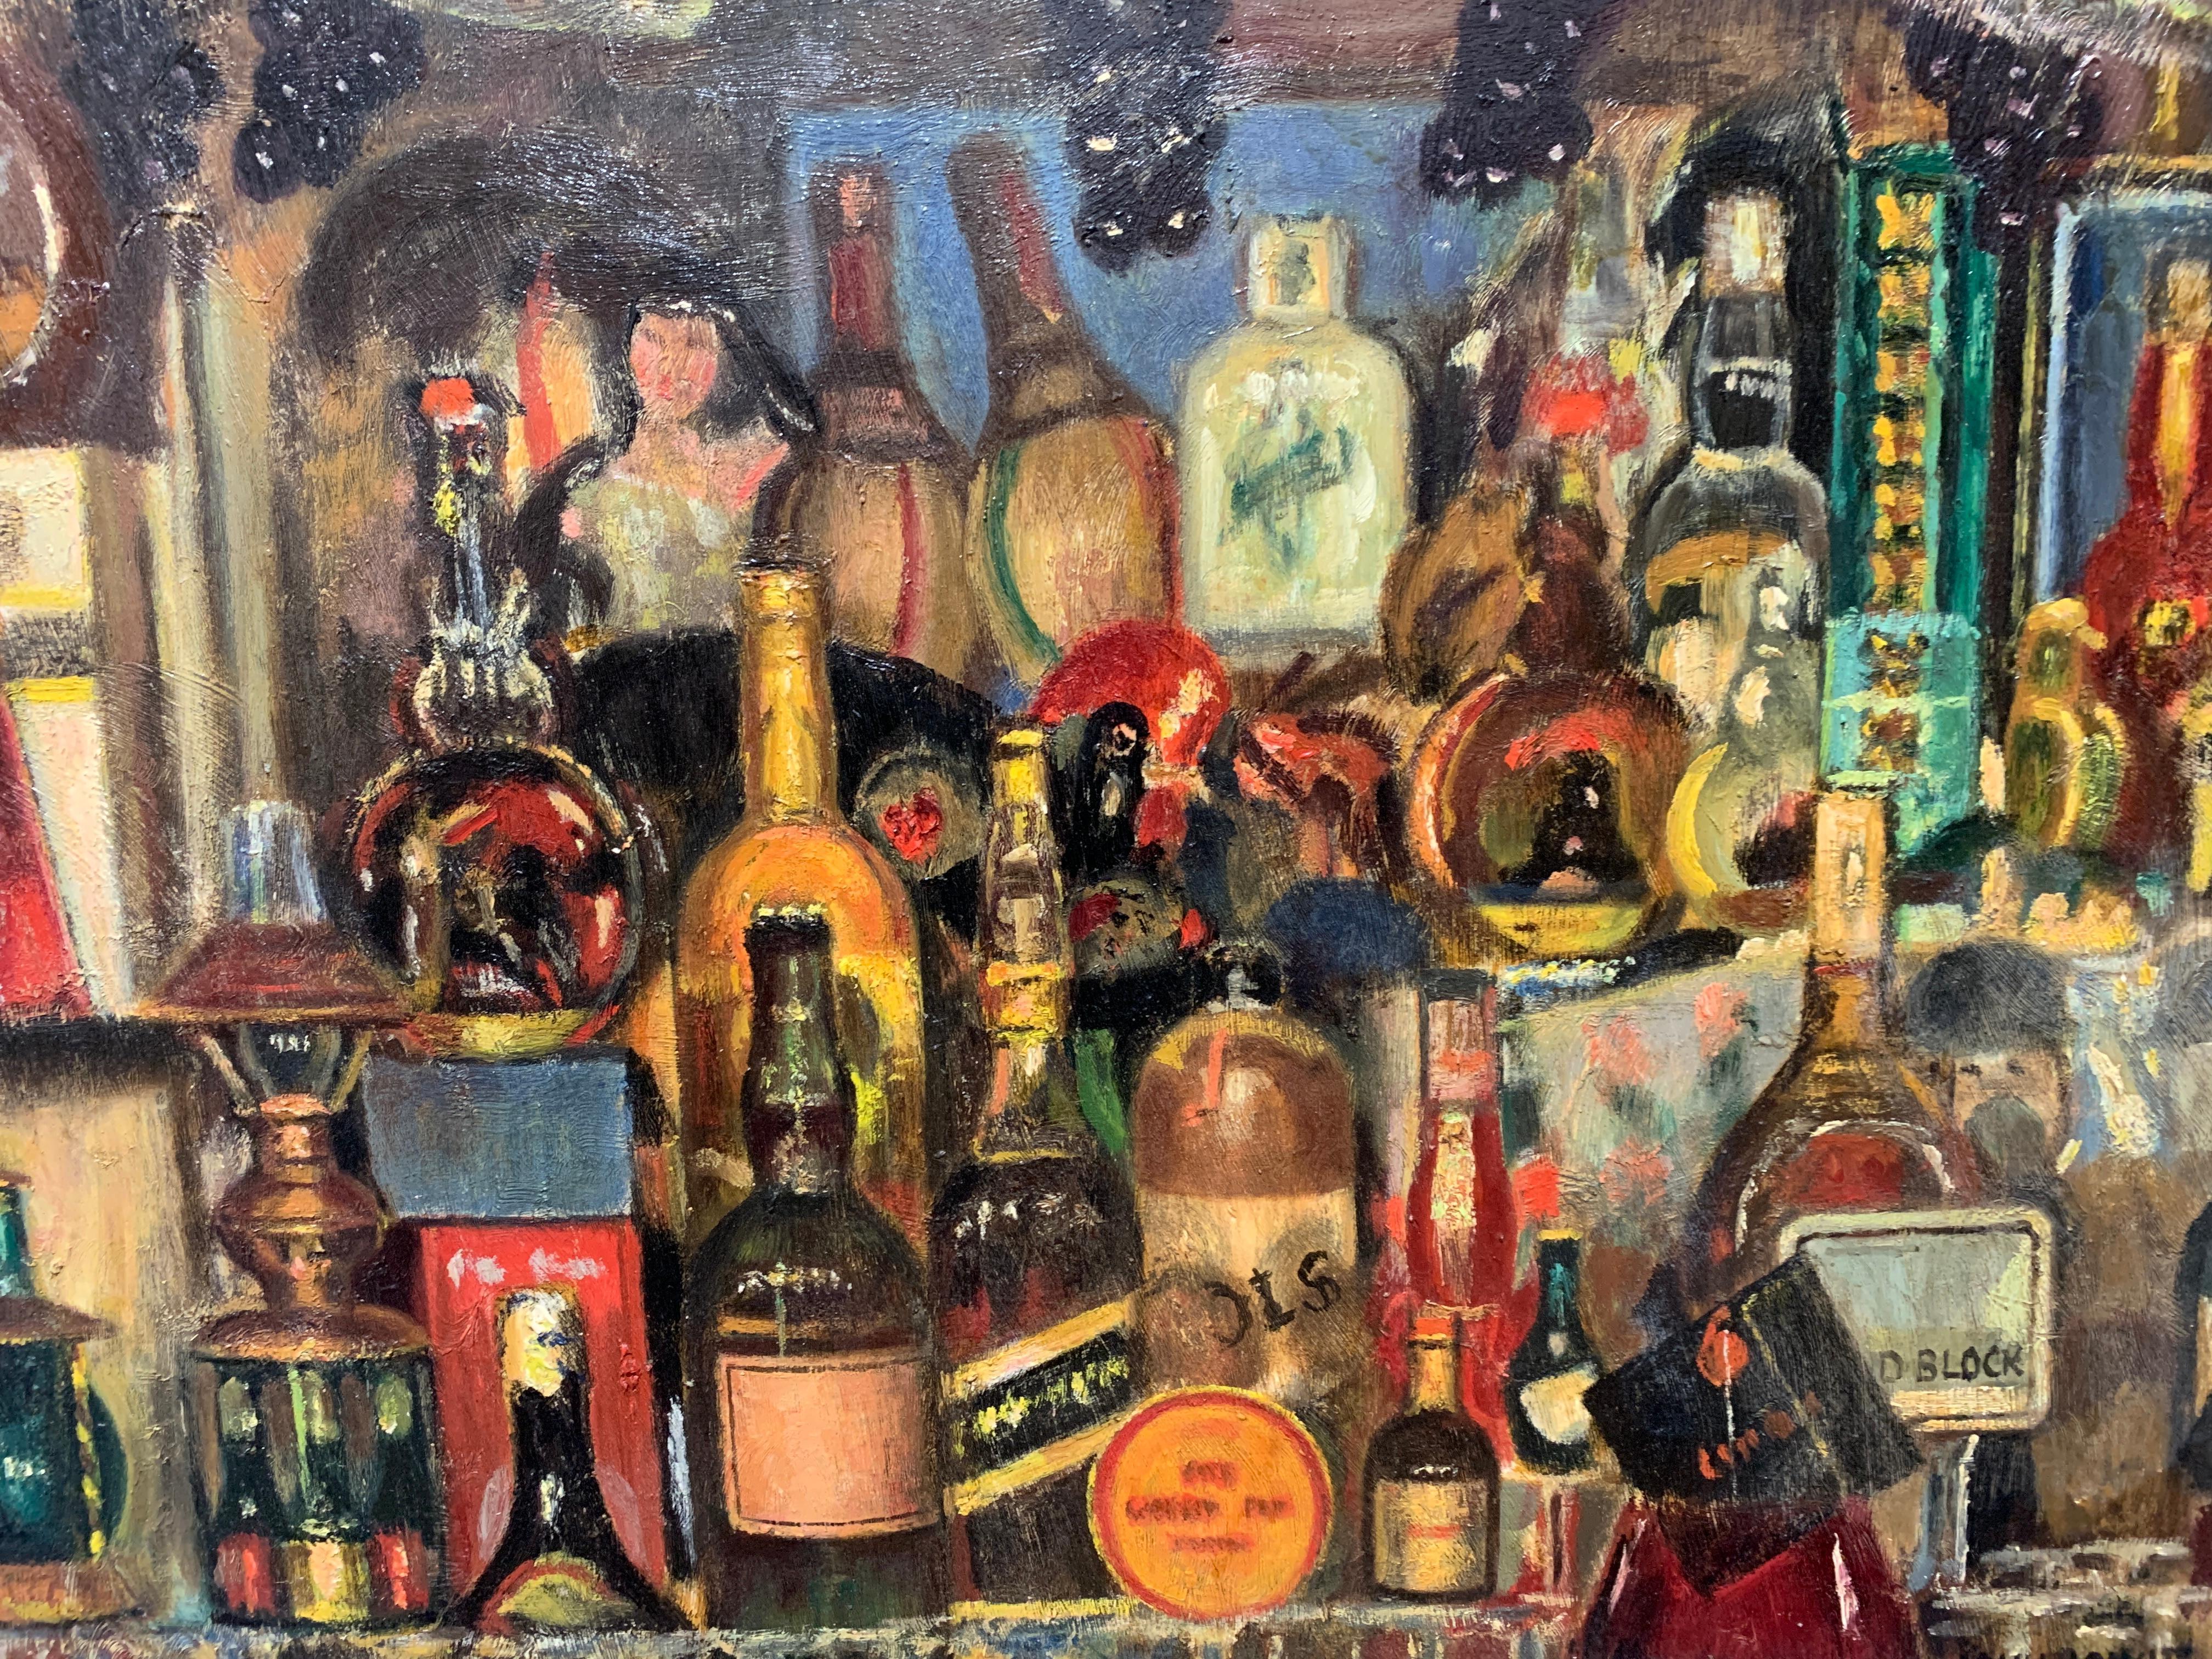 English  1960's mid century modern bar of bottles of alcohol in a pub/bar - Brown Still-Life Painting by John Jowitt